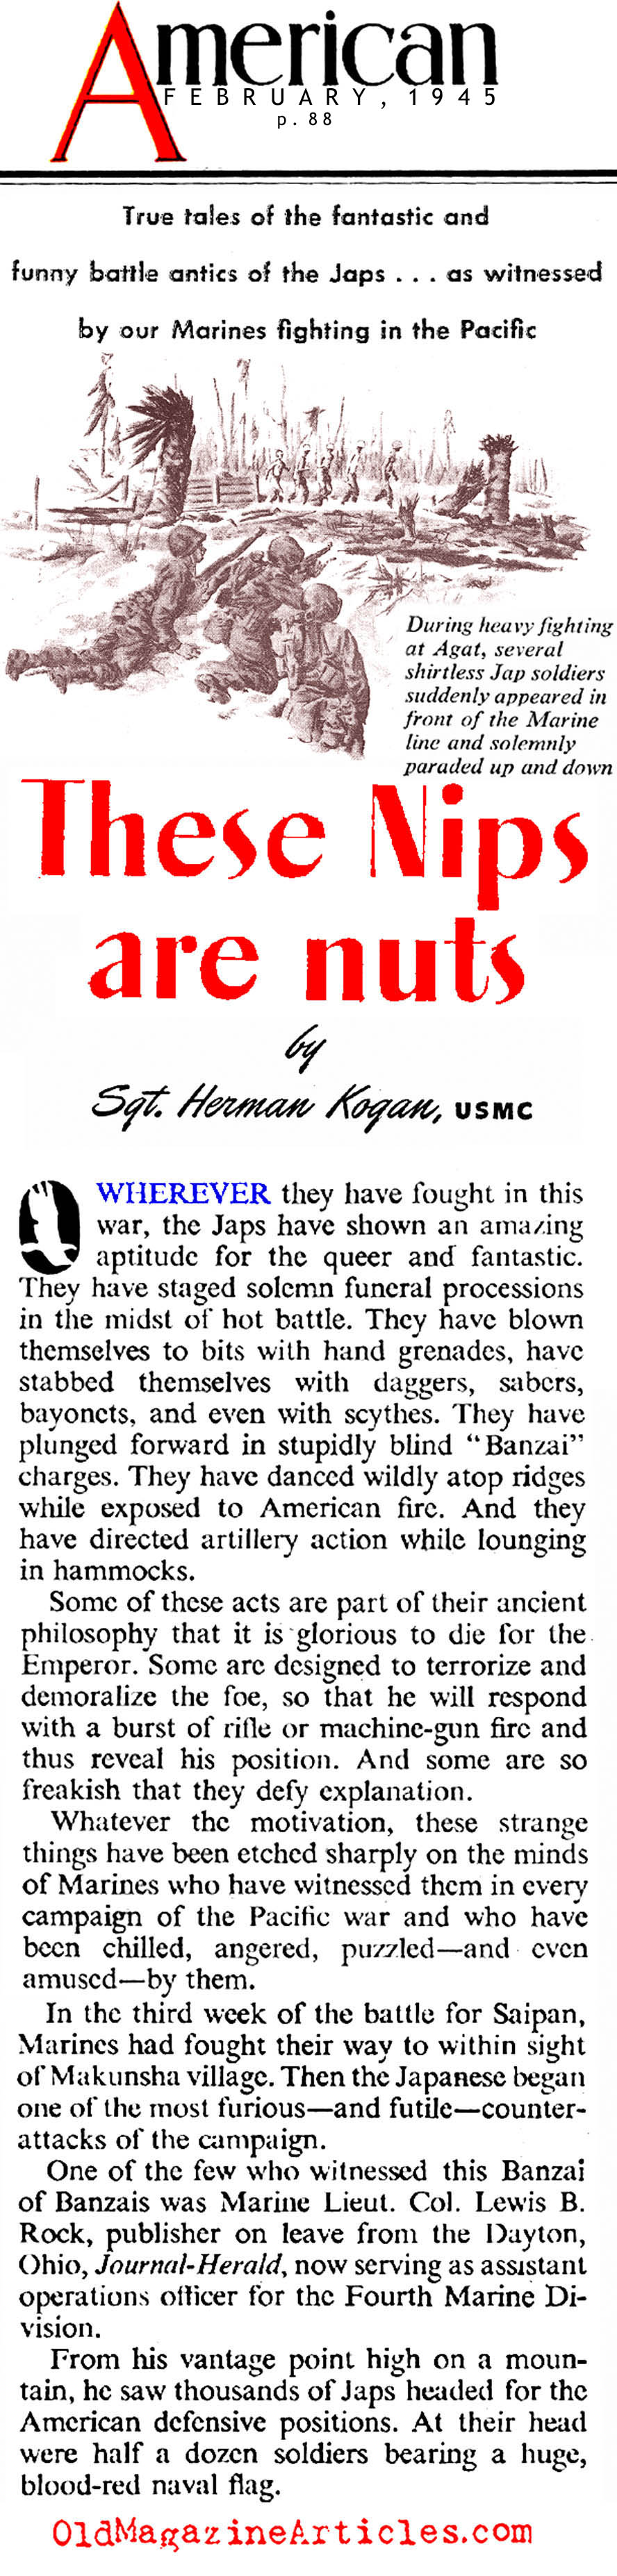 Engaging The Japanese Soldier (The American Magazine, 1945)